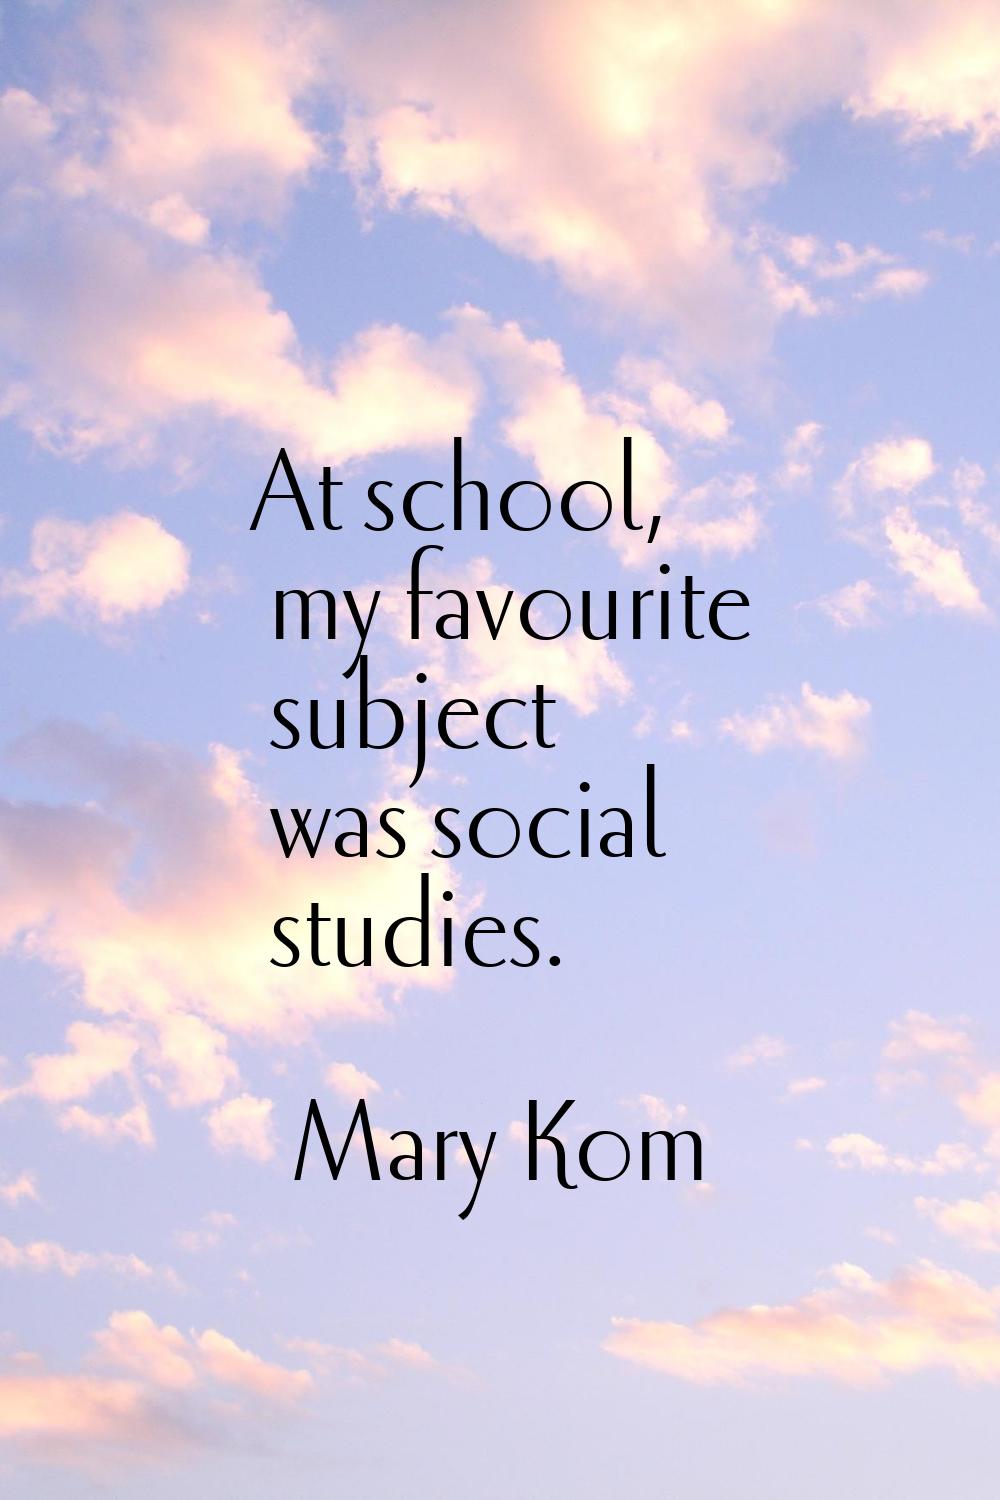 At school, my favourite subject was social studies.